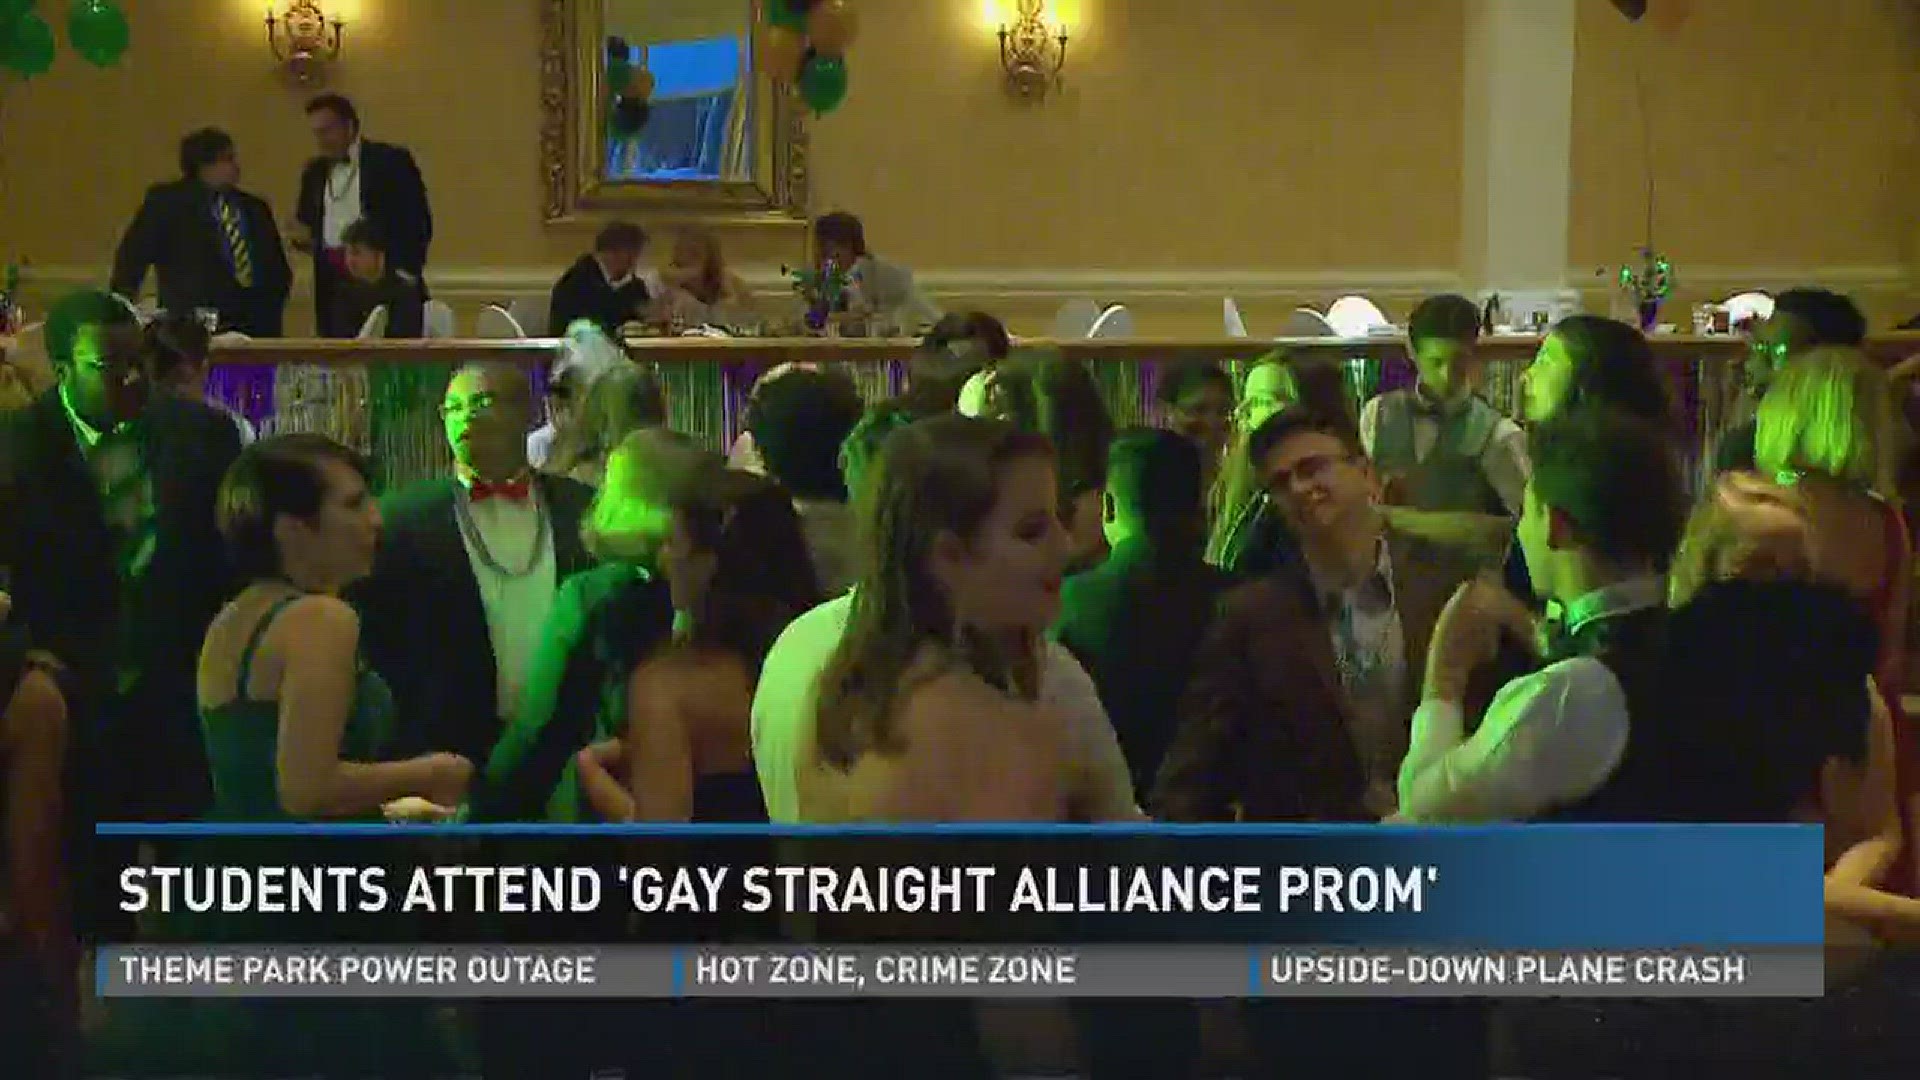 Local LGBT students enjoy prom night in a safe environment 13newsnow picture